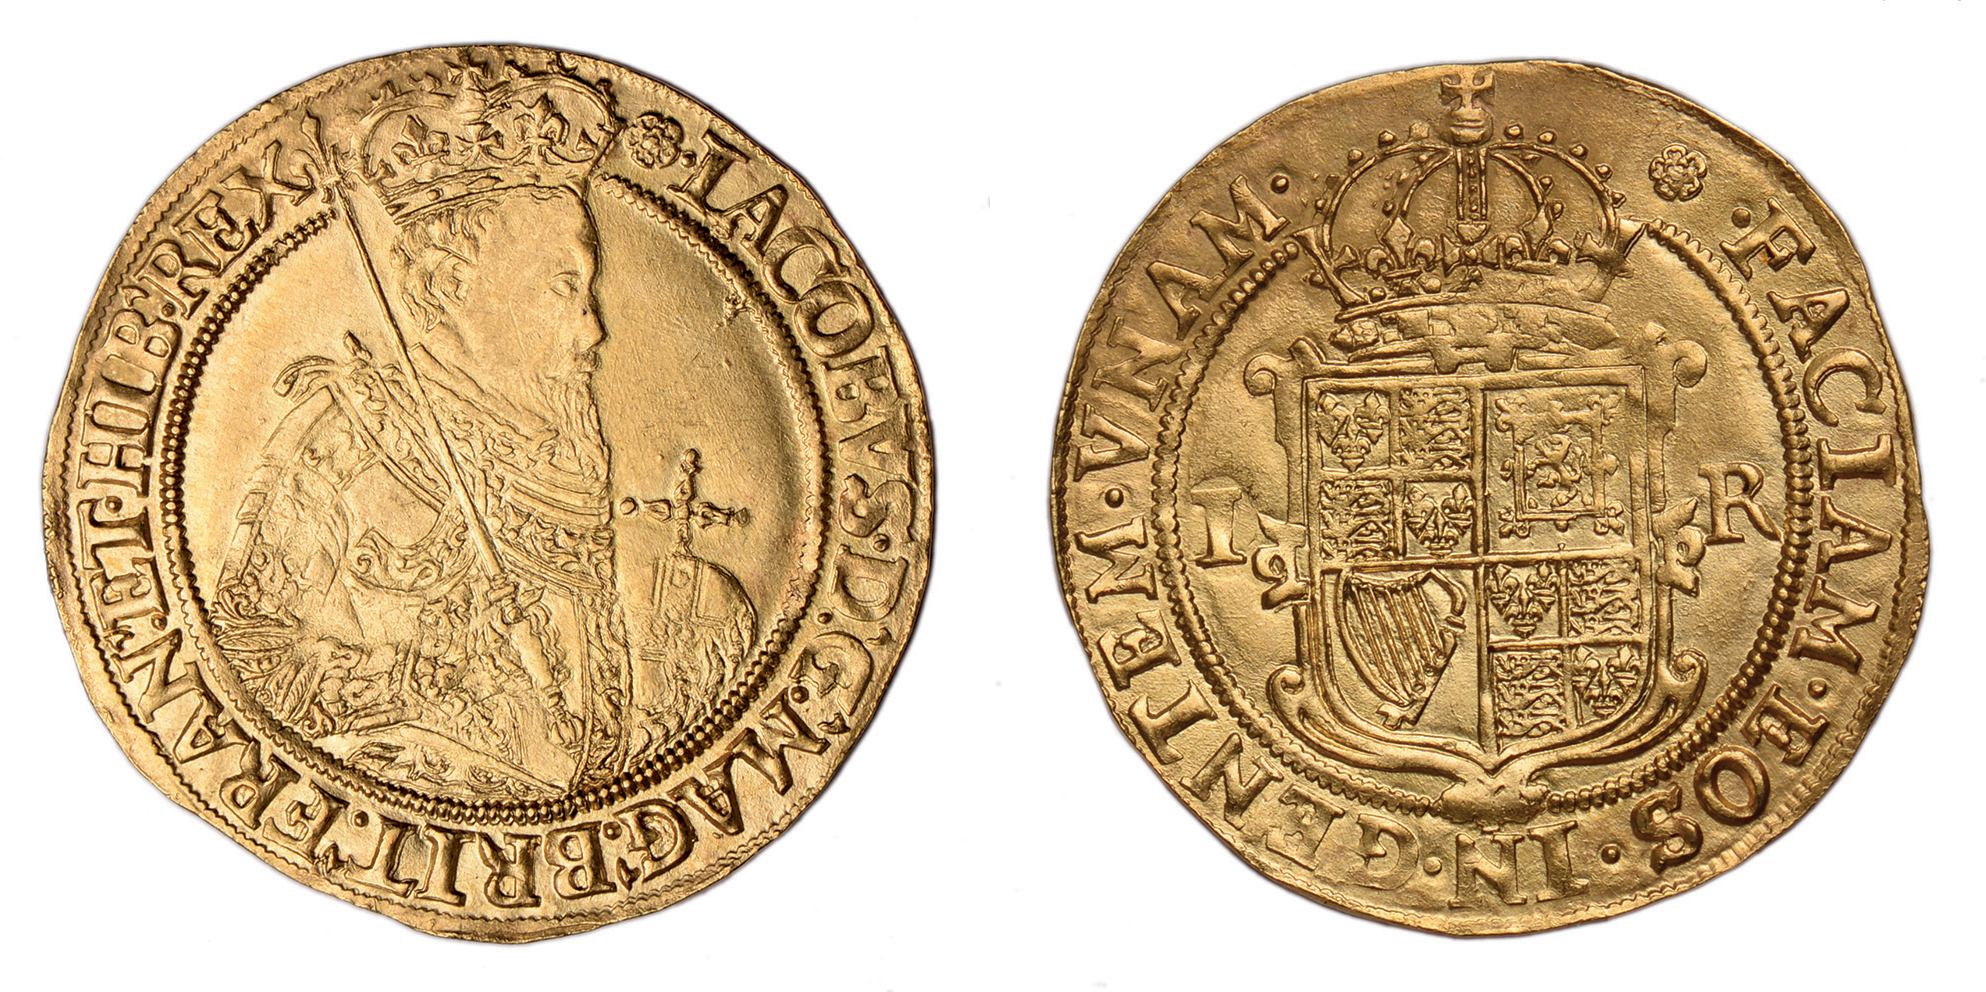 † James I, second coinage, unite, mm. rose (1605-1606), crowned second bust r., holding orb and